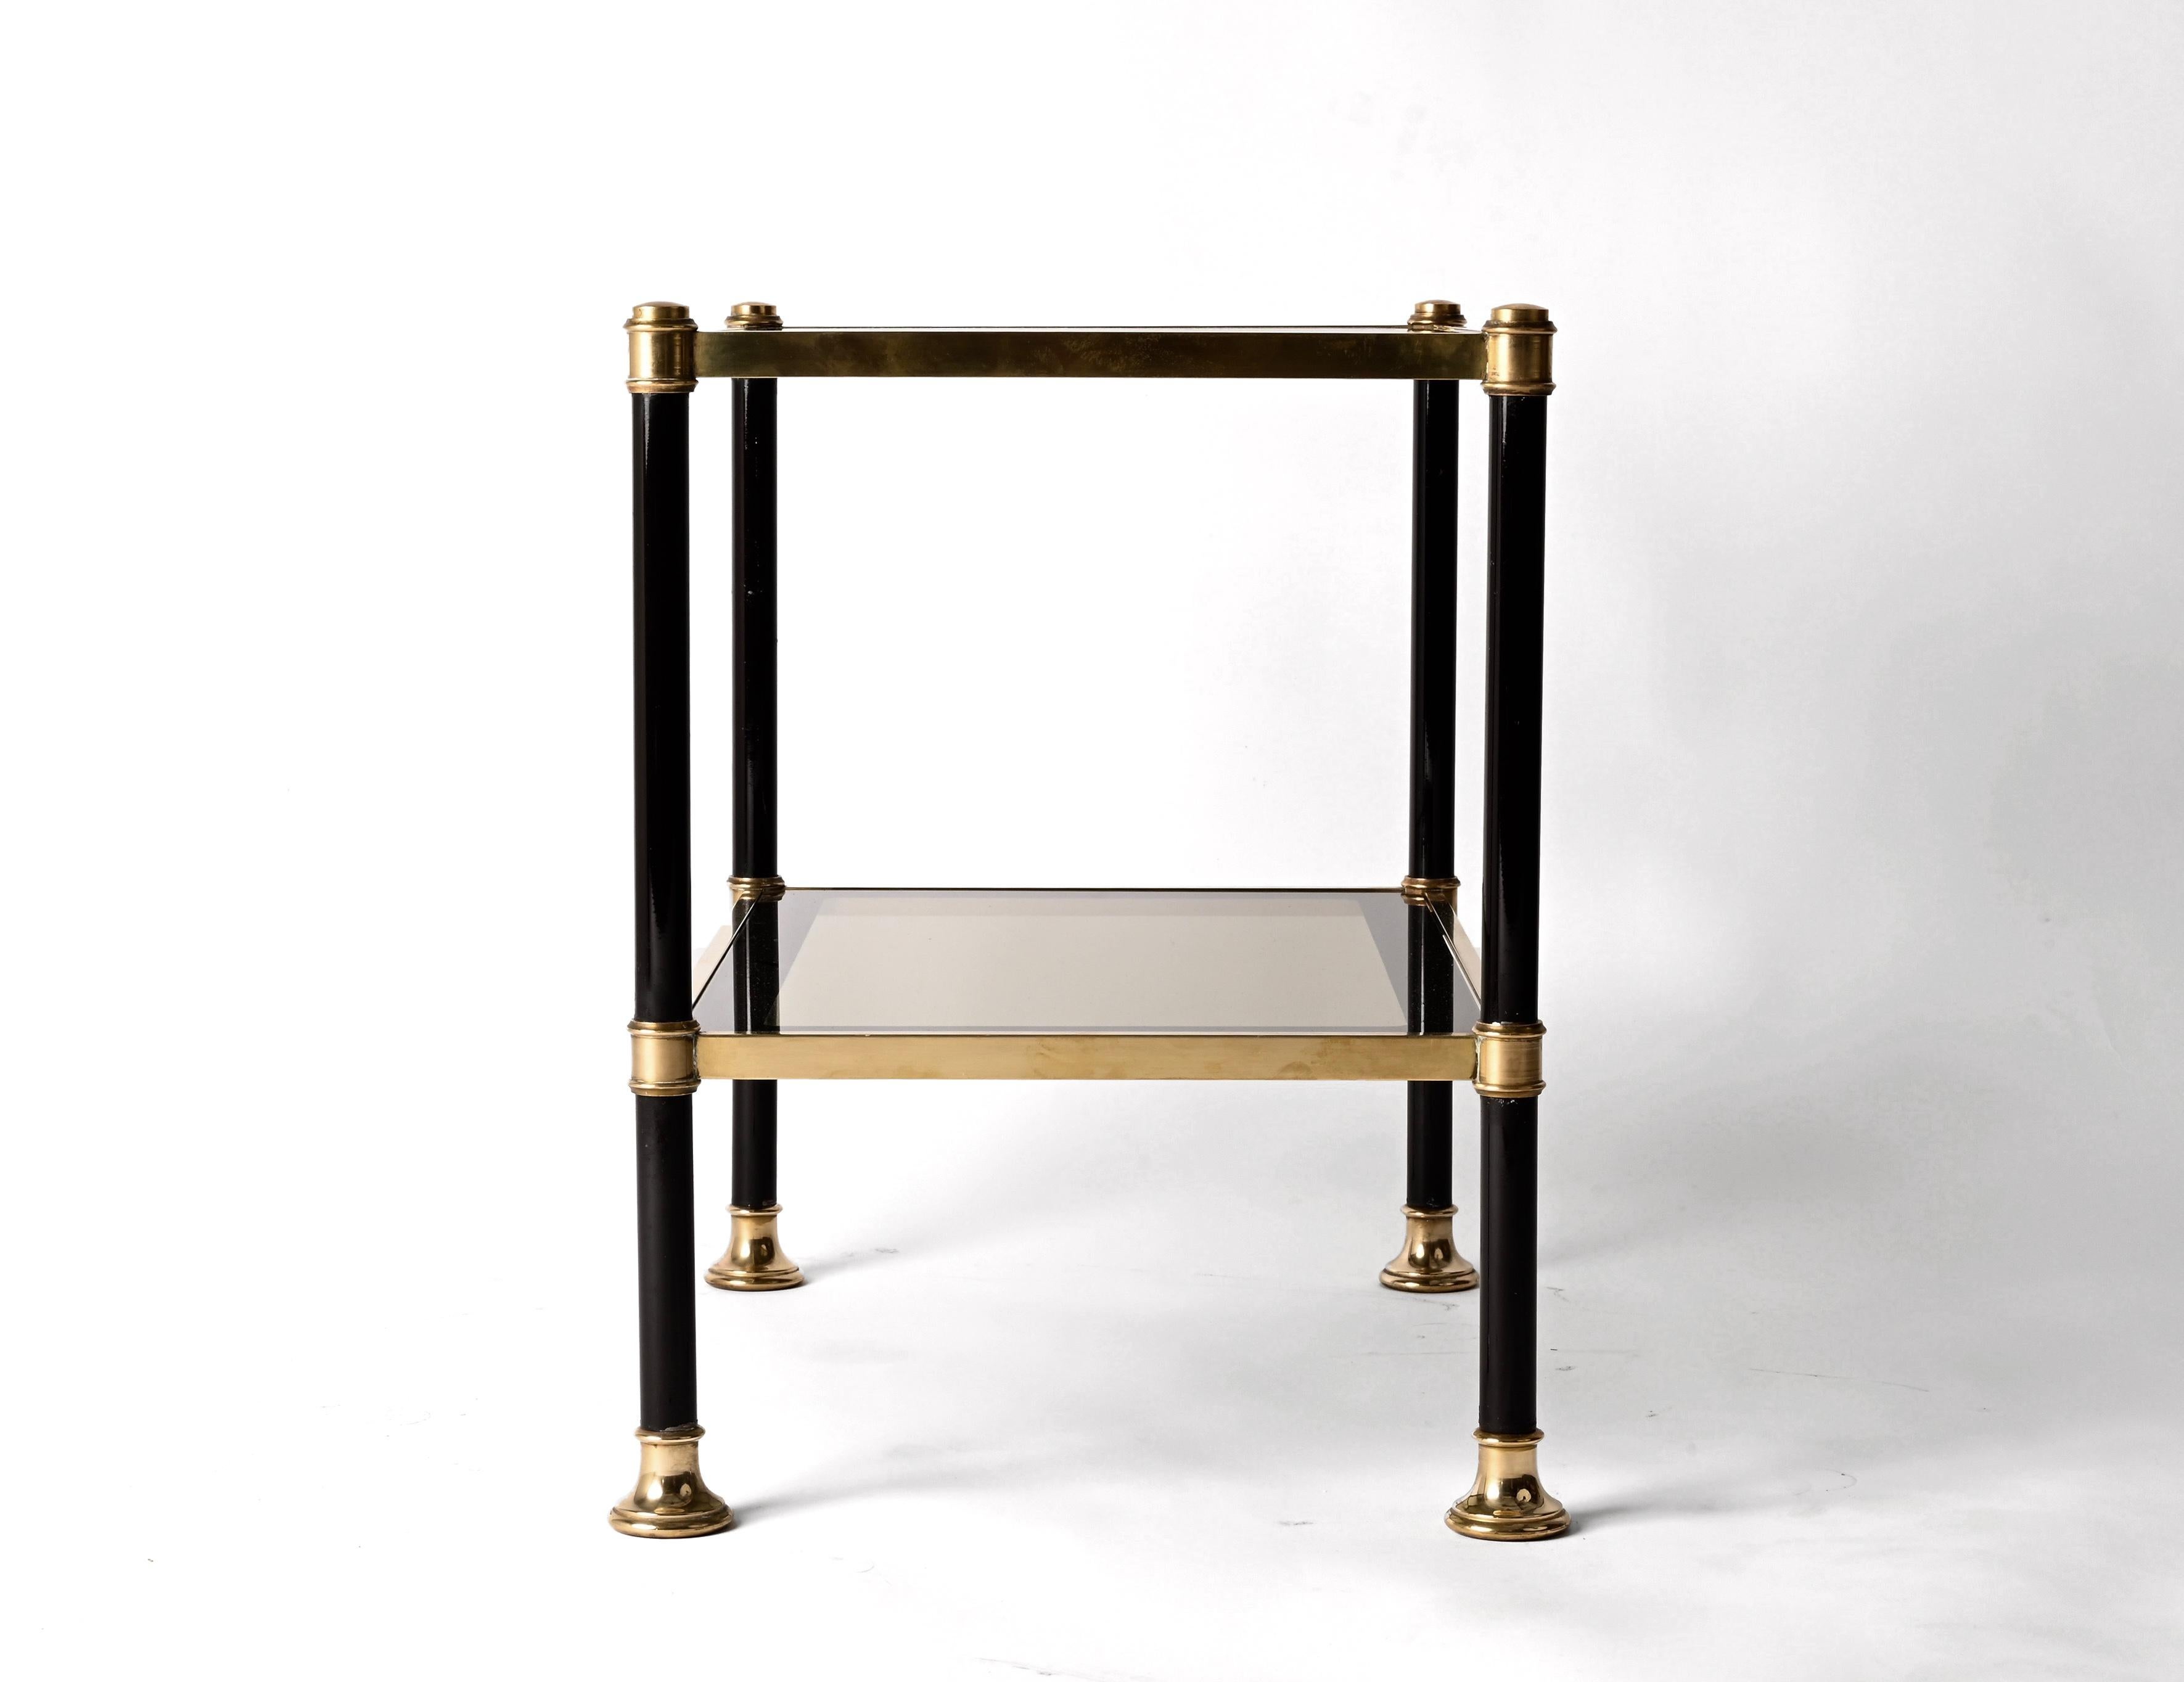 Midcentury Brass and Black Metal Rectangular Coffee Table with Smoked Glass 1970 For Sale 1